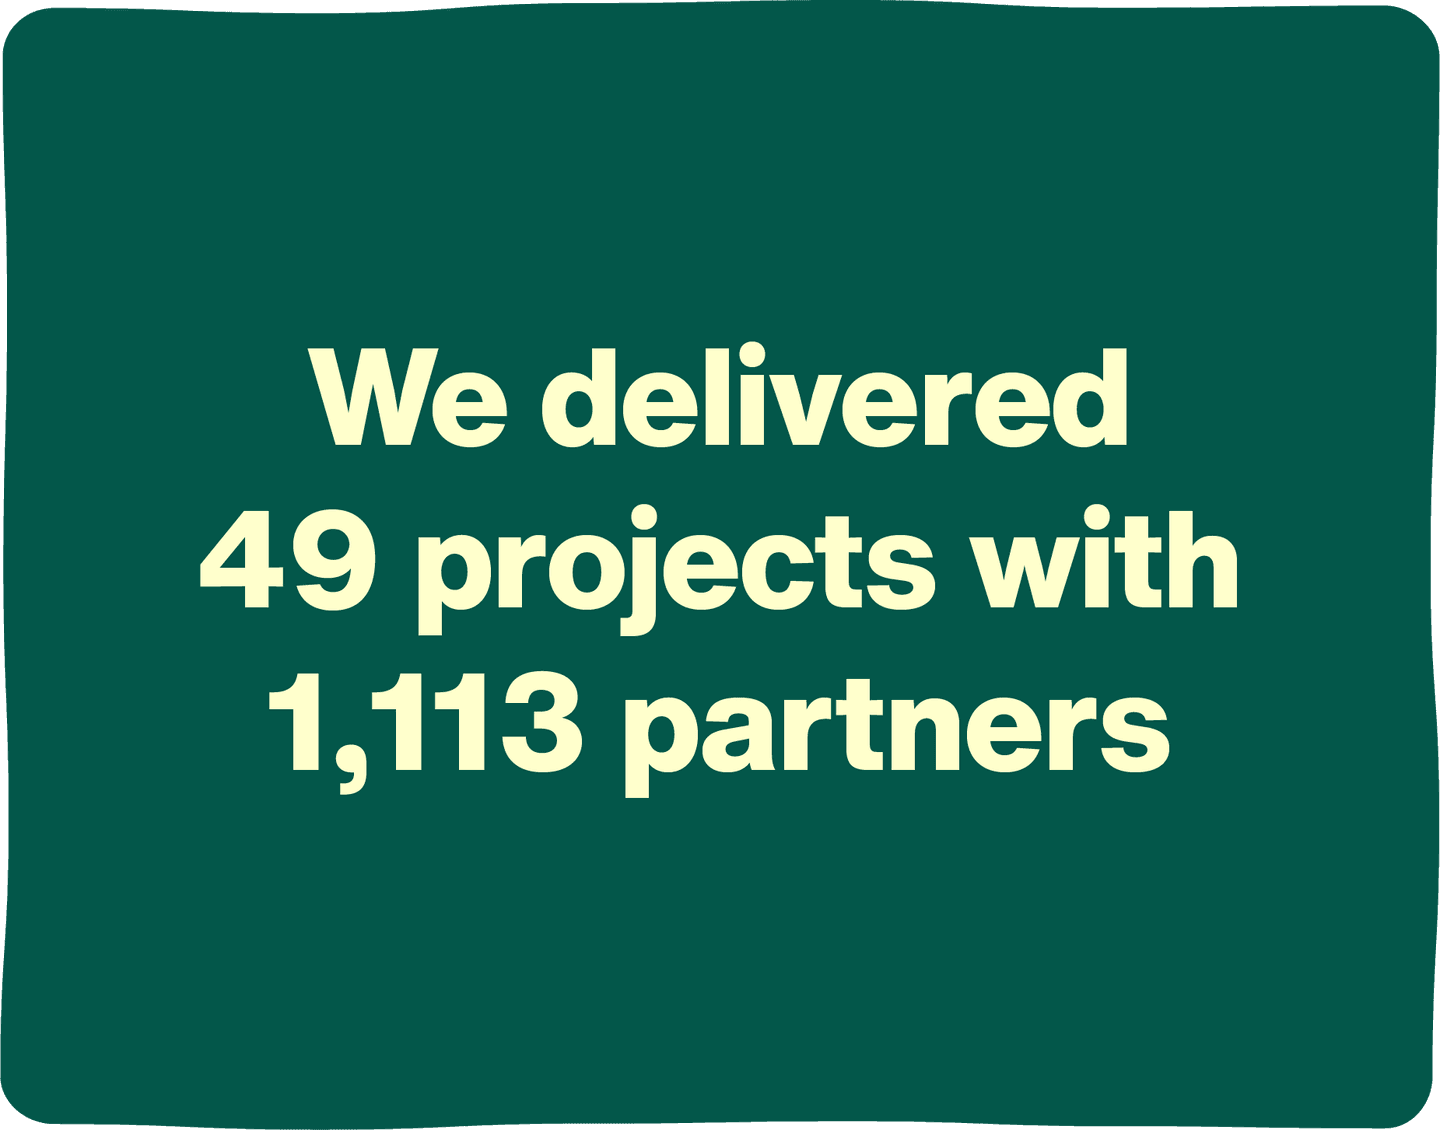 Stat: We delivered 49 projects with 1113 partners